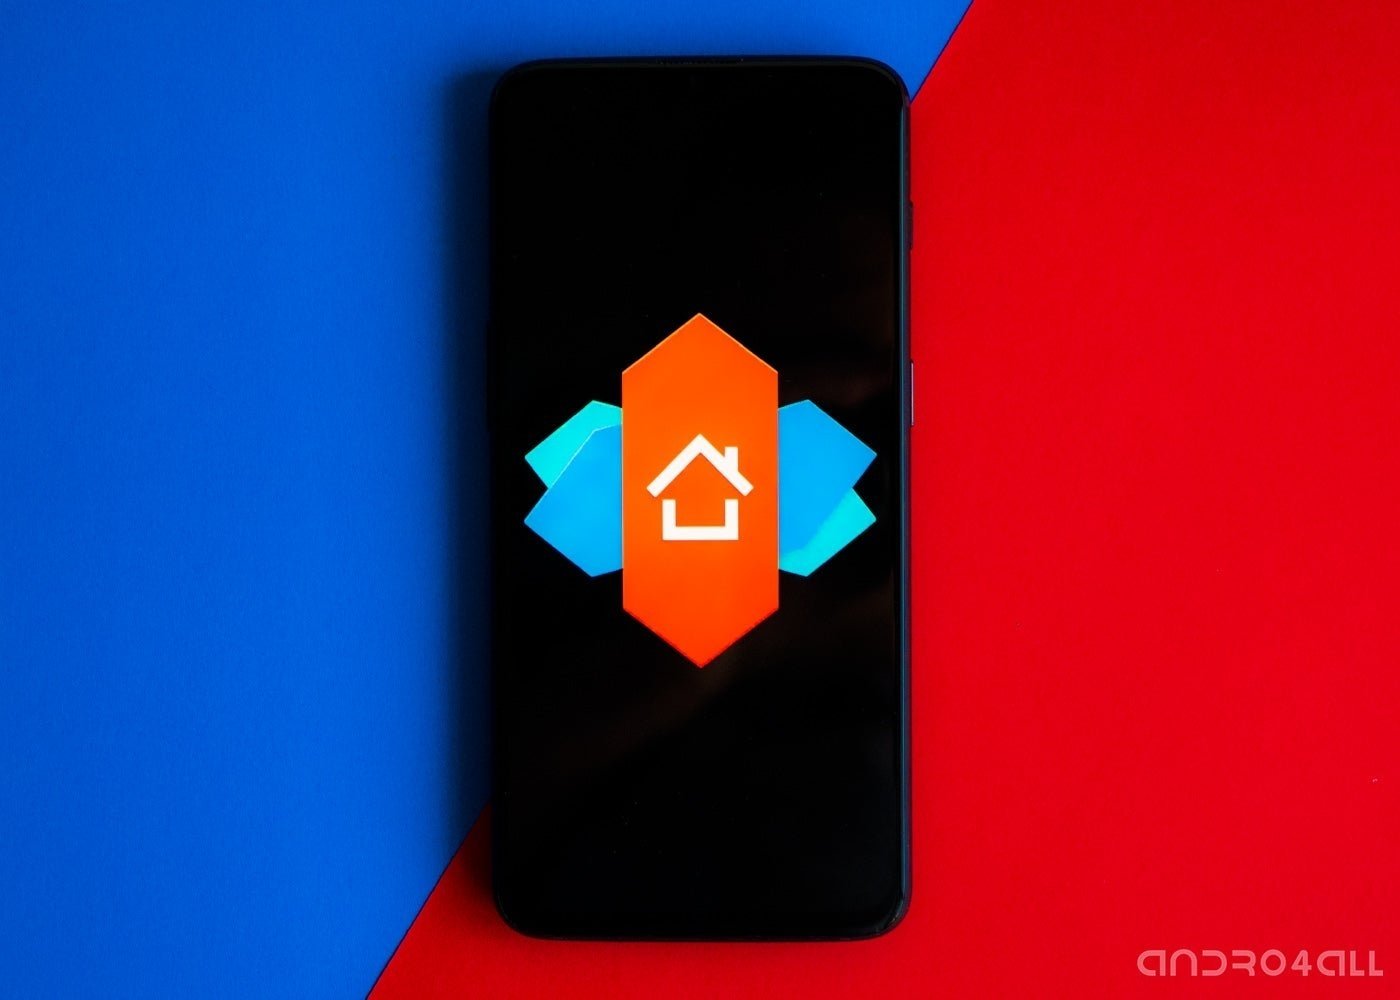 Nova Launcher 7 available to everyone